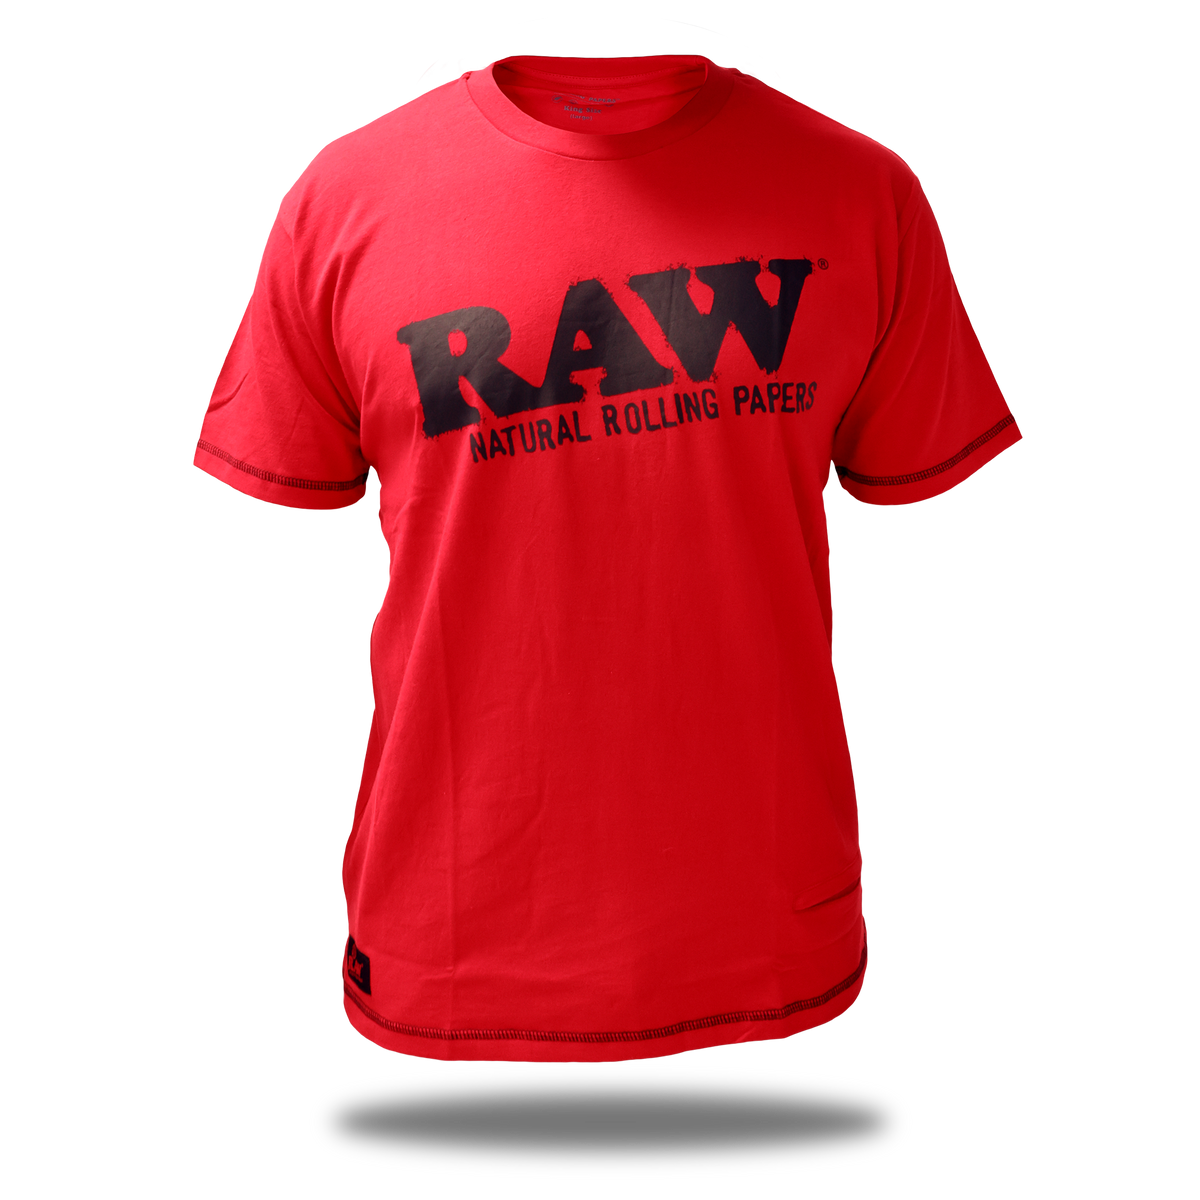 RAW Rolling Papers Core T-Shirt Clothing Accessories WAR00472-MUSA01 esd-official